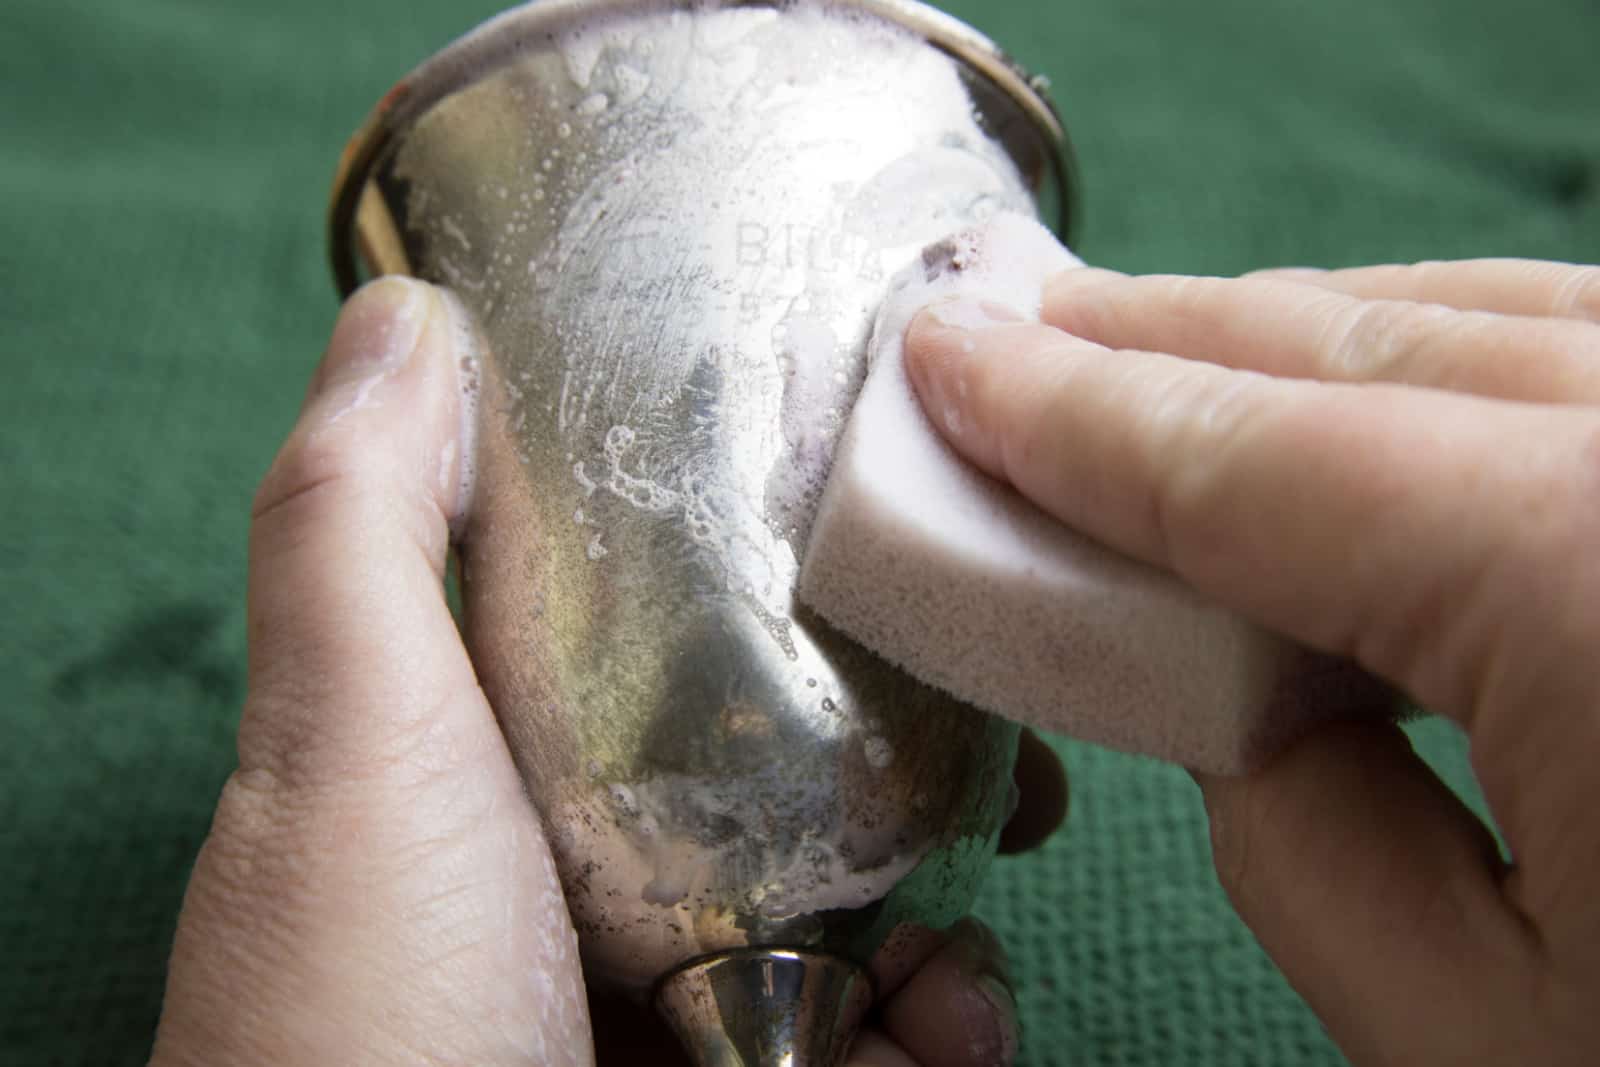 Close up of woman's hands using sponge to polish tarnish off silver goblet.